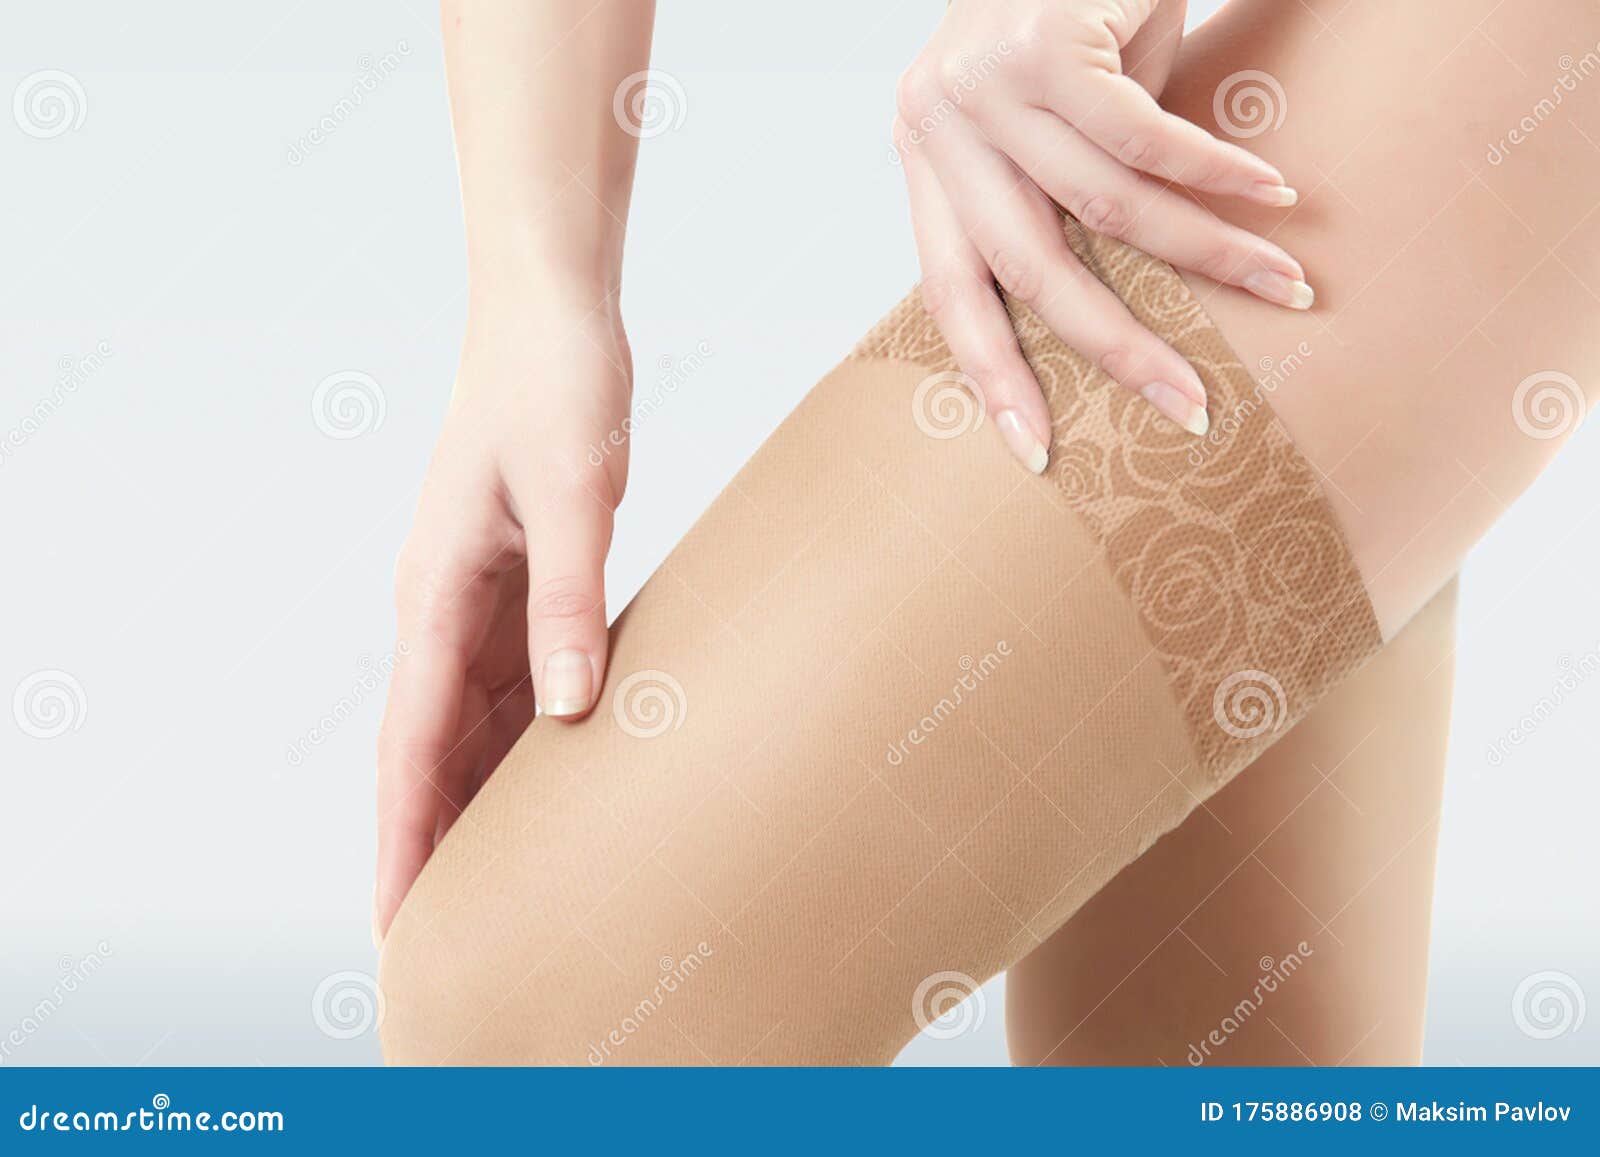 Medical Compression Stockings for Varicose Veins. Compression Knit Elastic,  Silicone Drops, Silicone Rubber, Silicone Layer Stock Photo - Image of  elastic, issues: 175886908